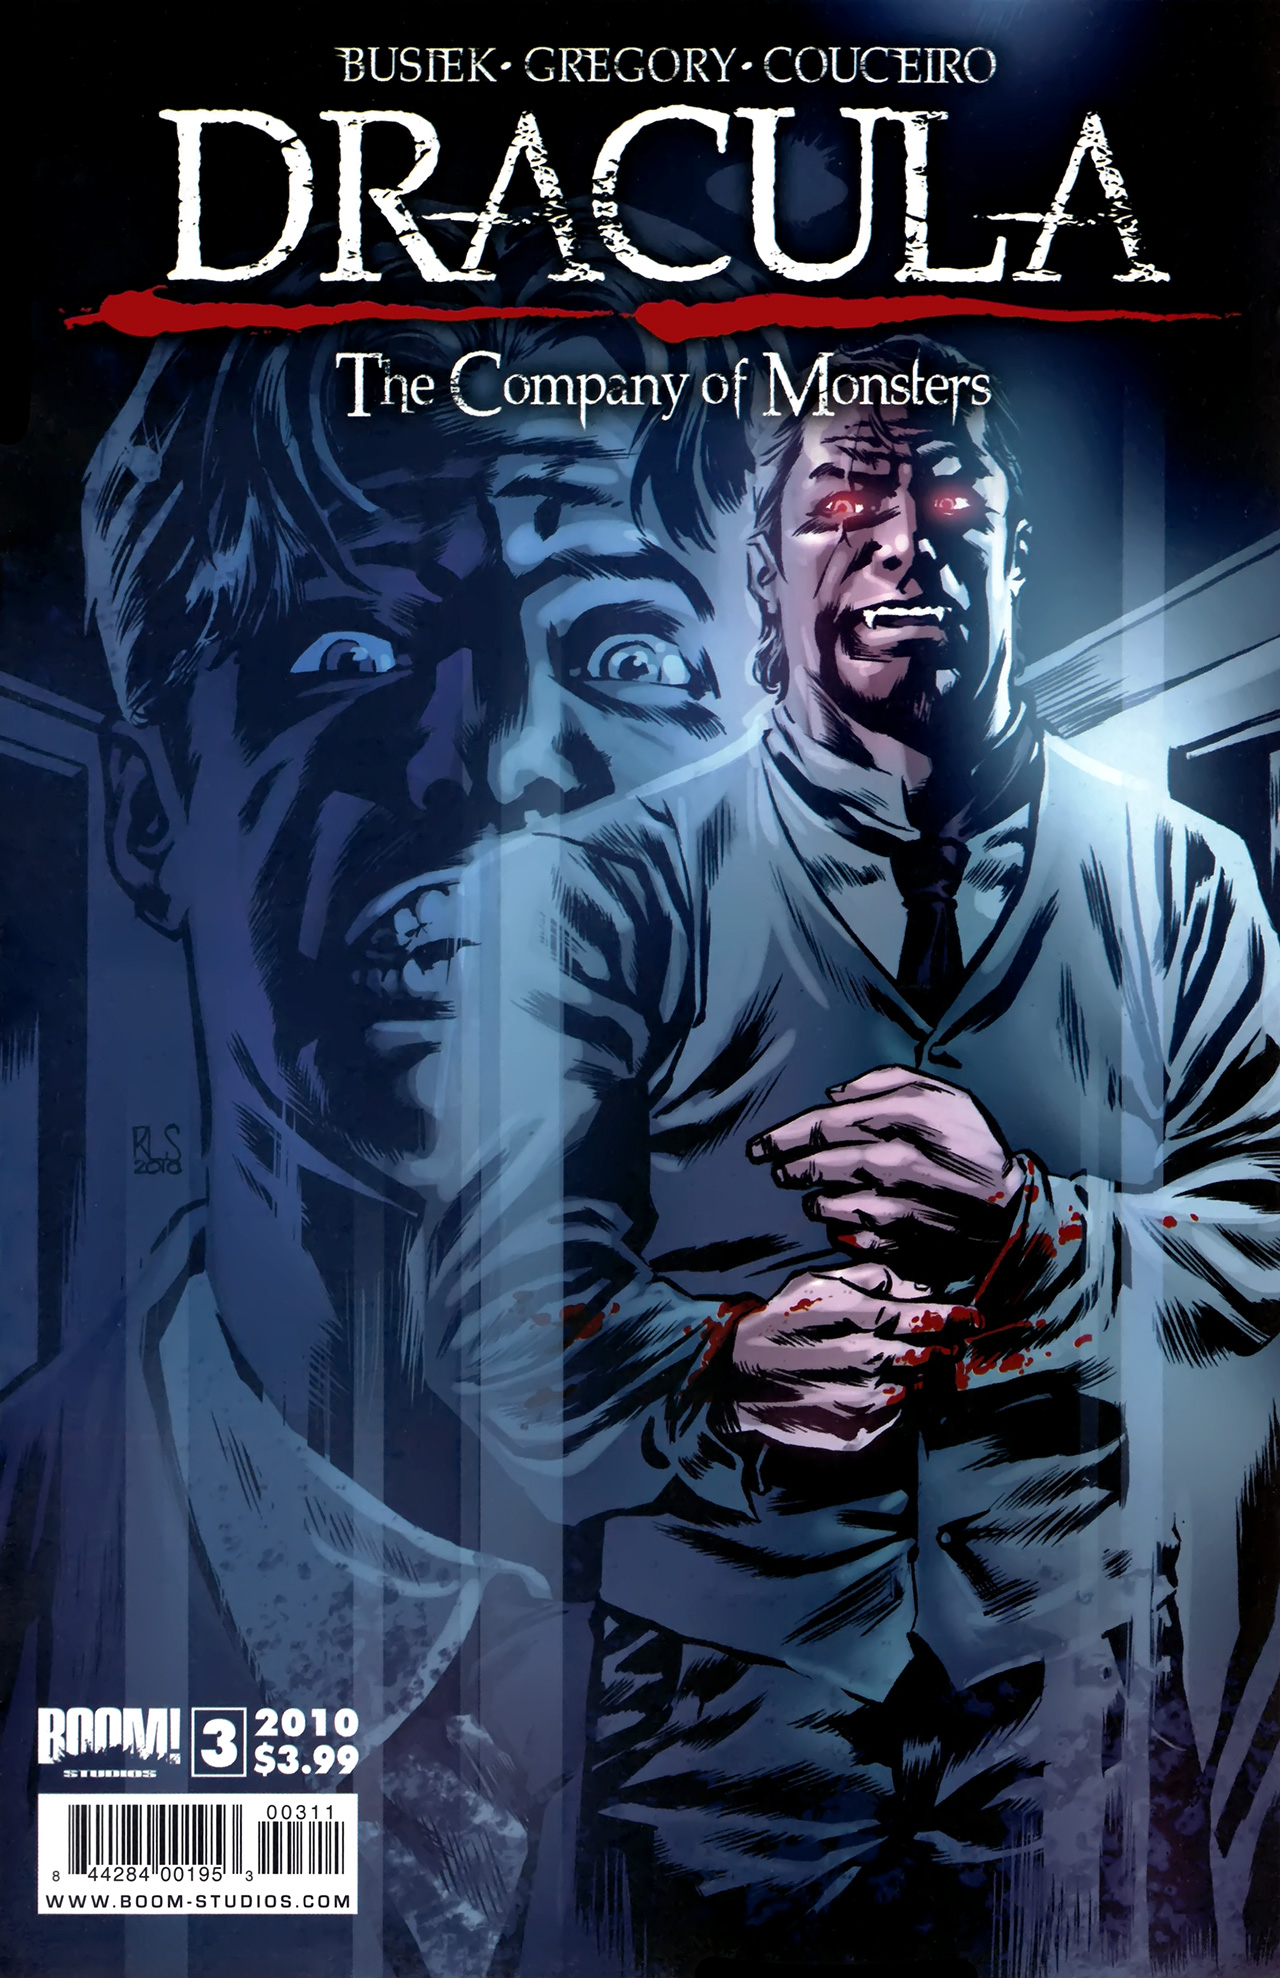 Dracula: The Company of Monsters #3